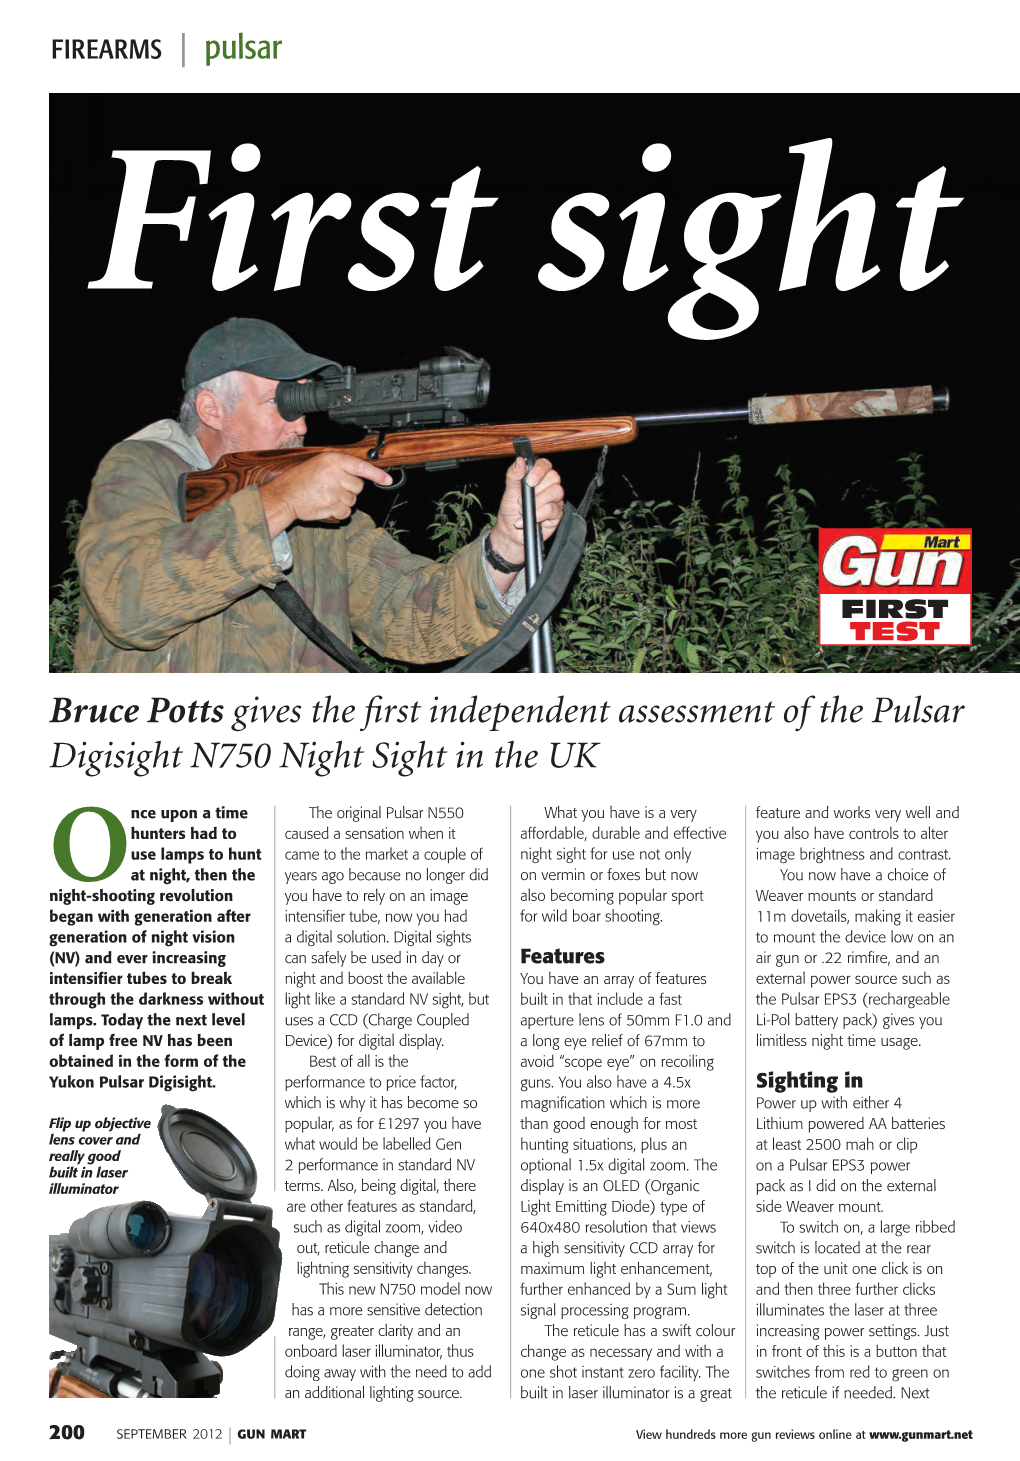 Bruce Potts Gives the First Independent Assessment of the Pulsar Digisight N750 Night Sight in the UK